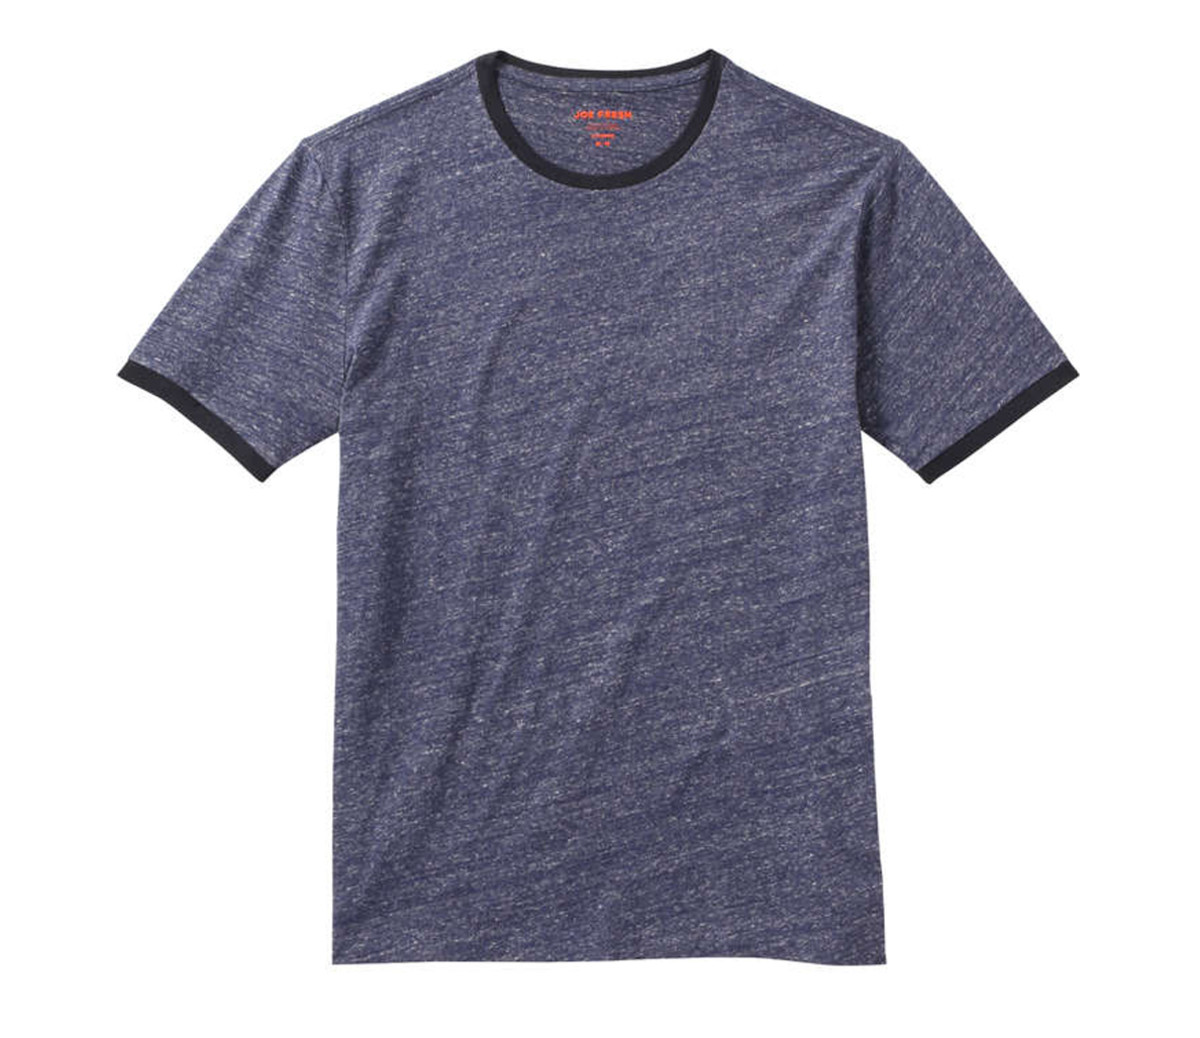 10 Best T-Shirts for Every Body Type